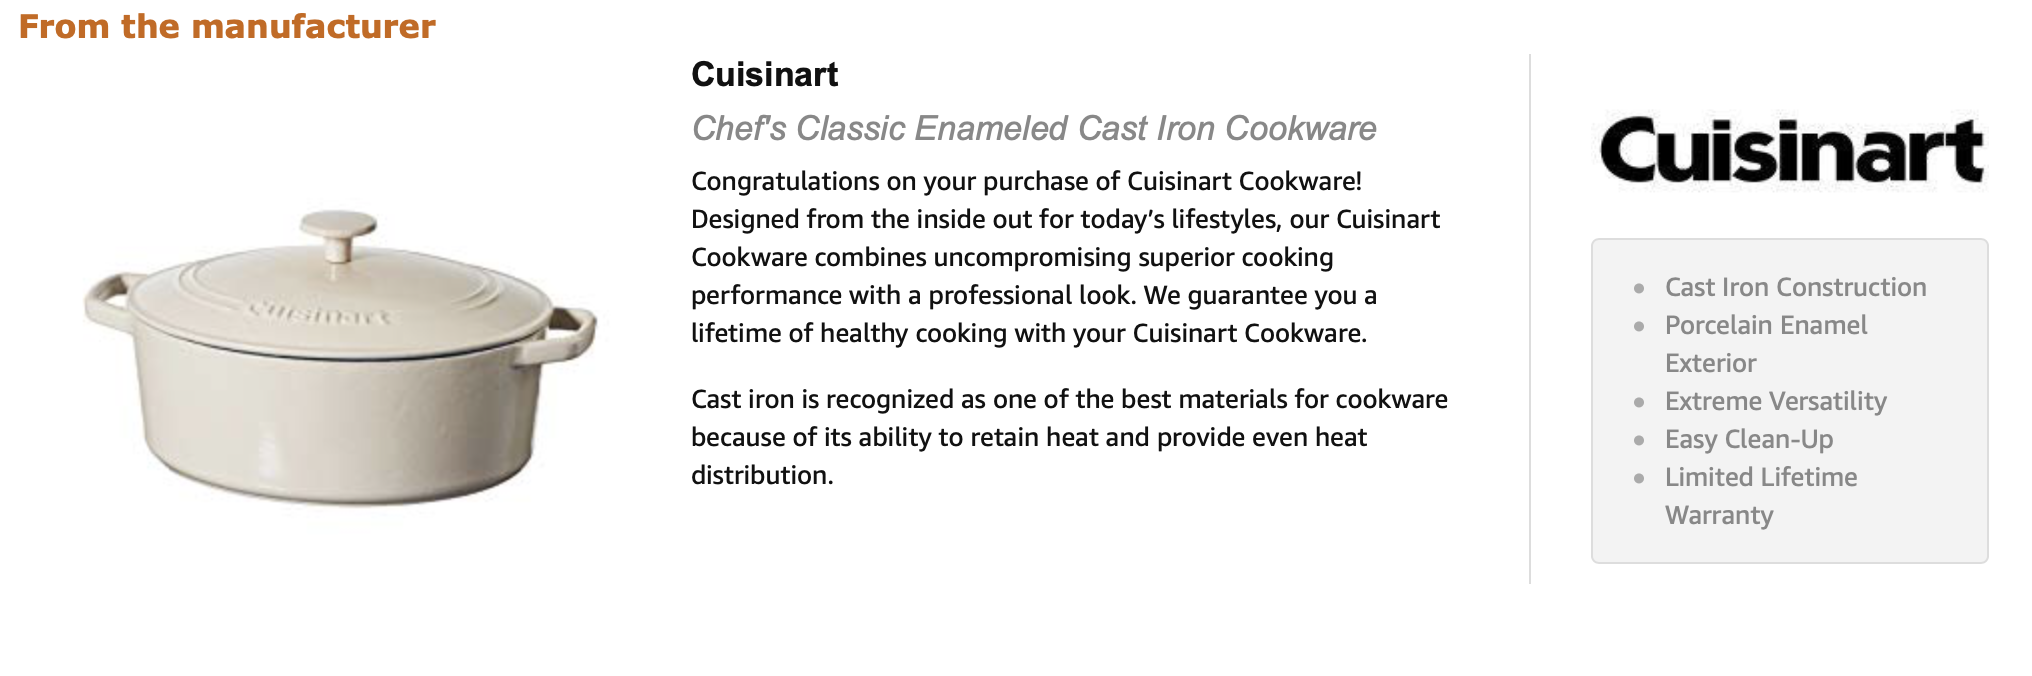 Cuisinart product image